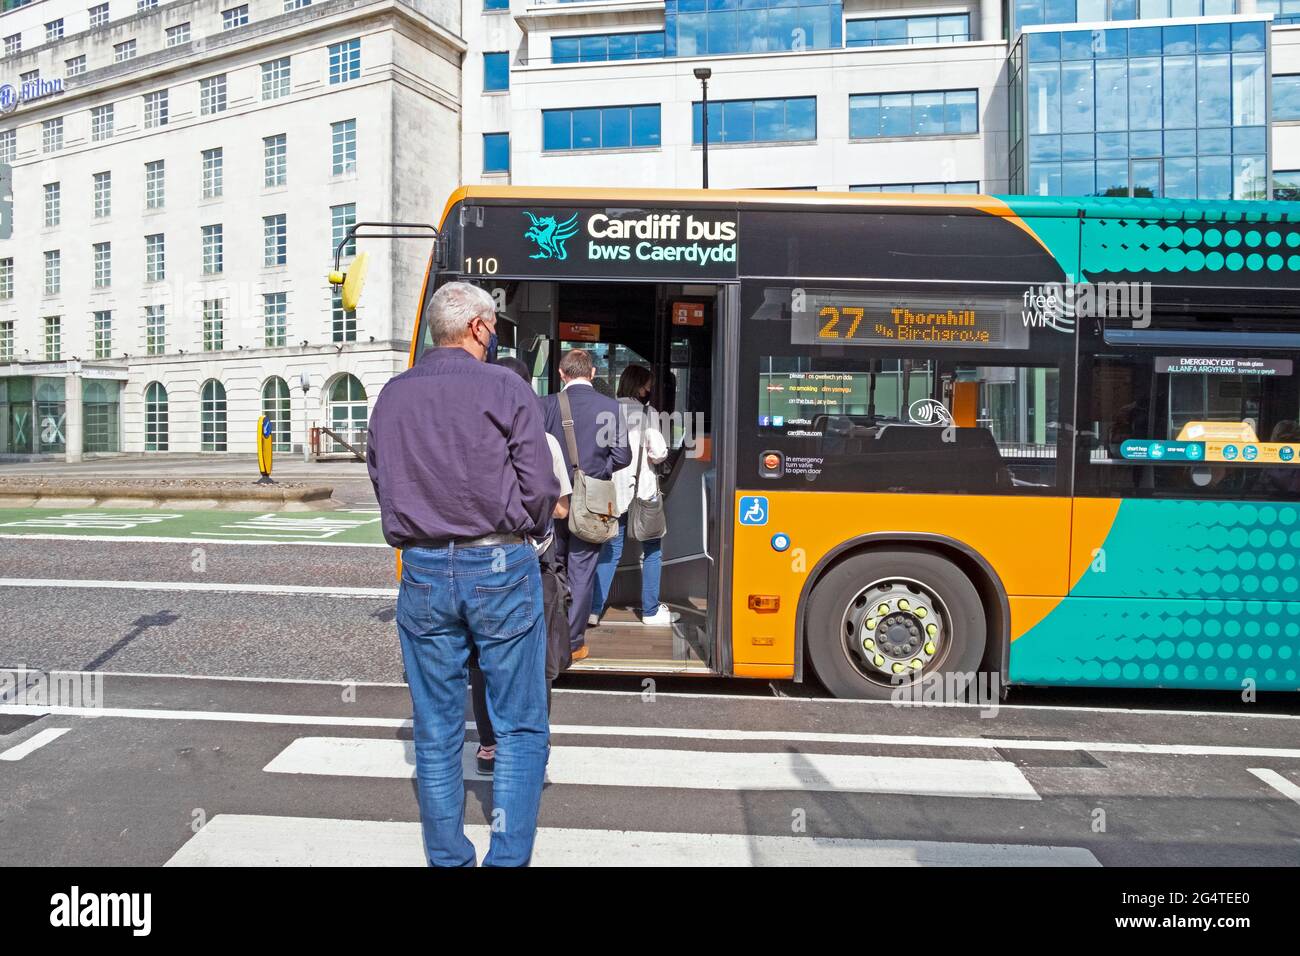 Cardiff Bus High Resolution Stock Photography and Images - Alamy